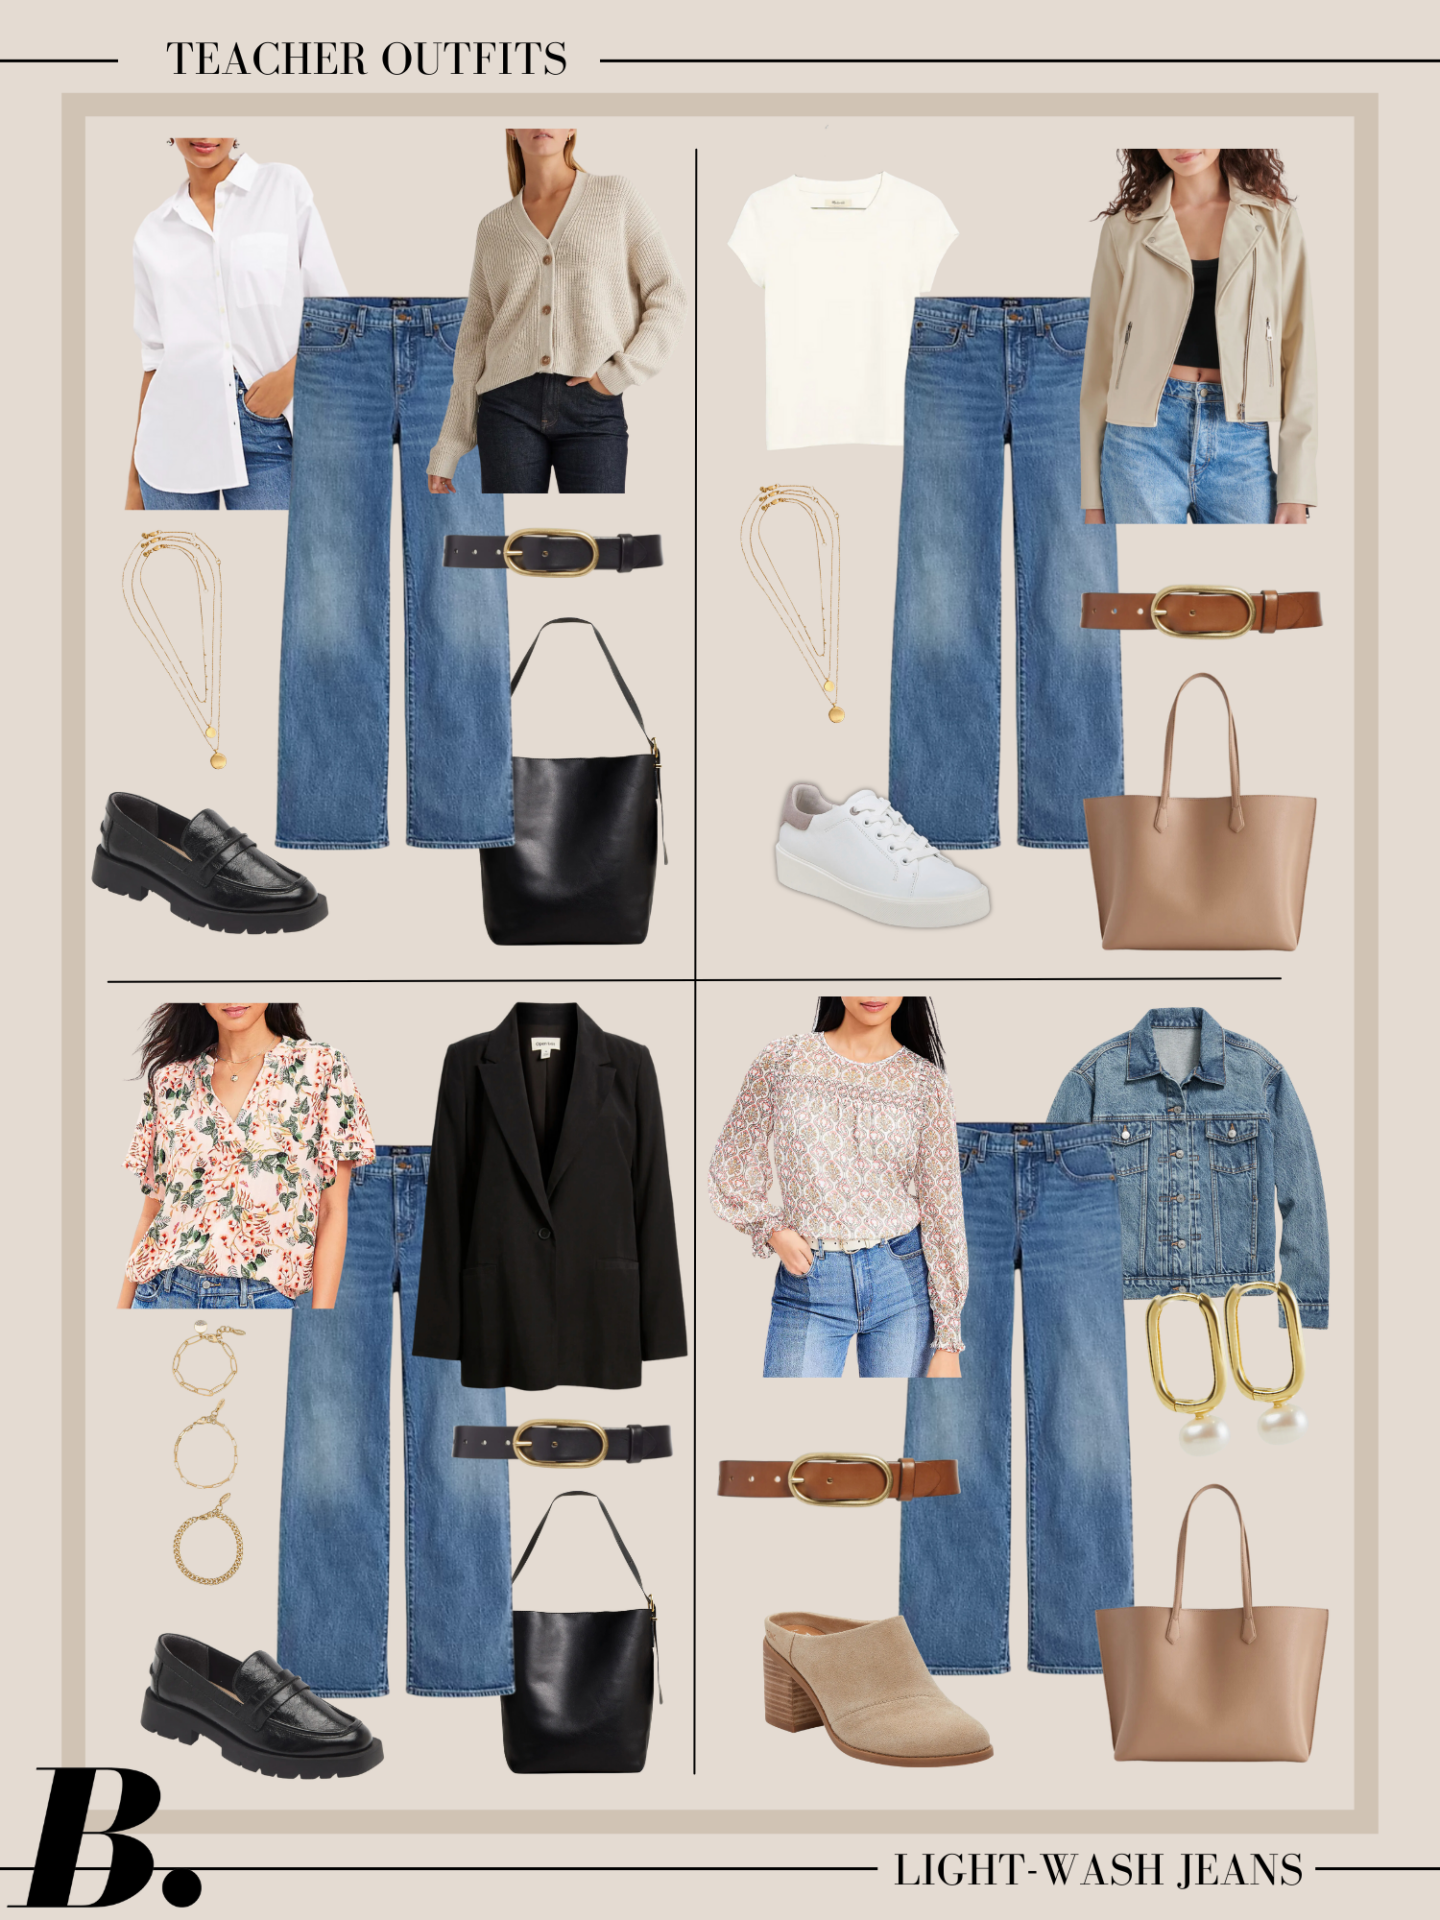 Spring Teacher Outfits with jeans